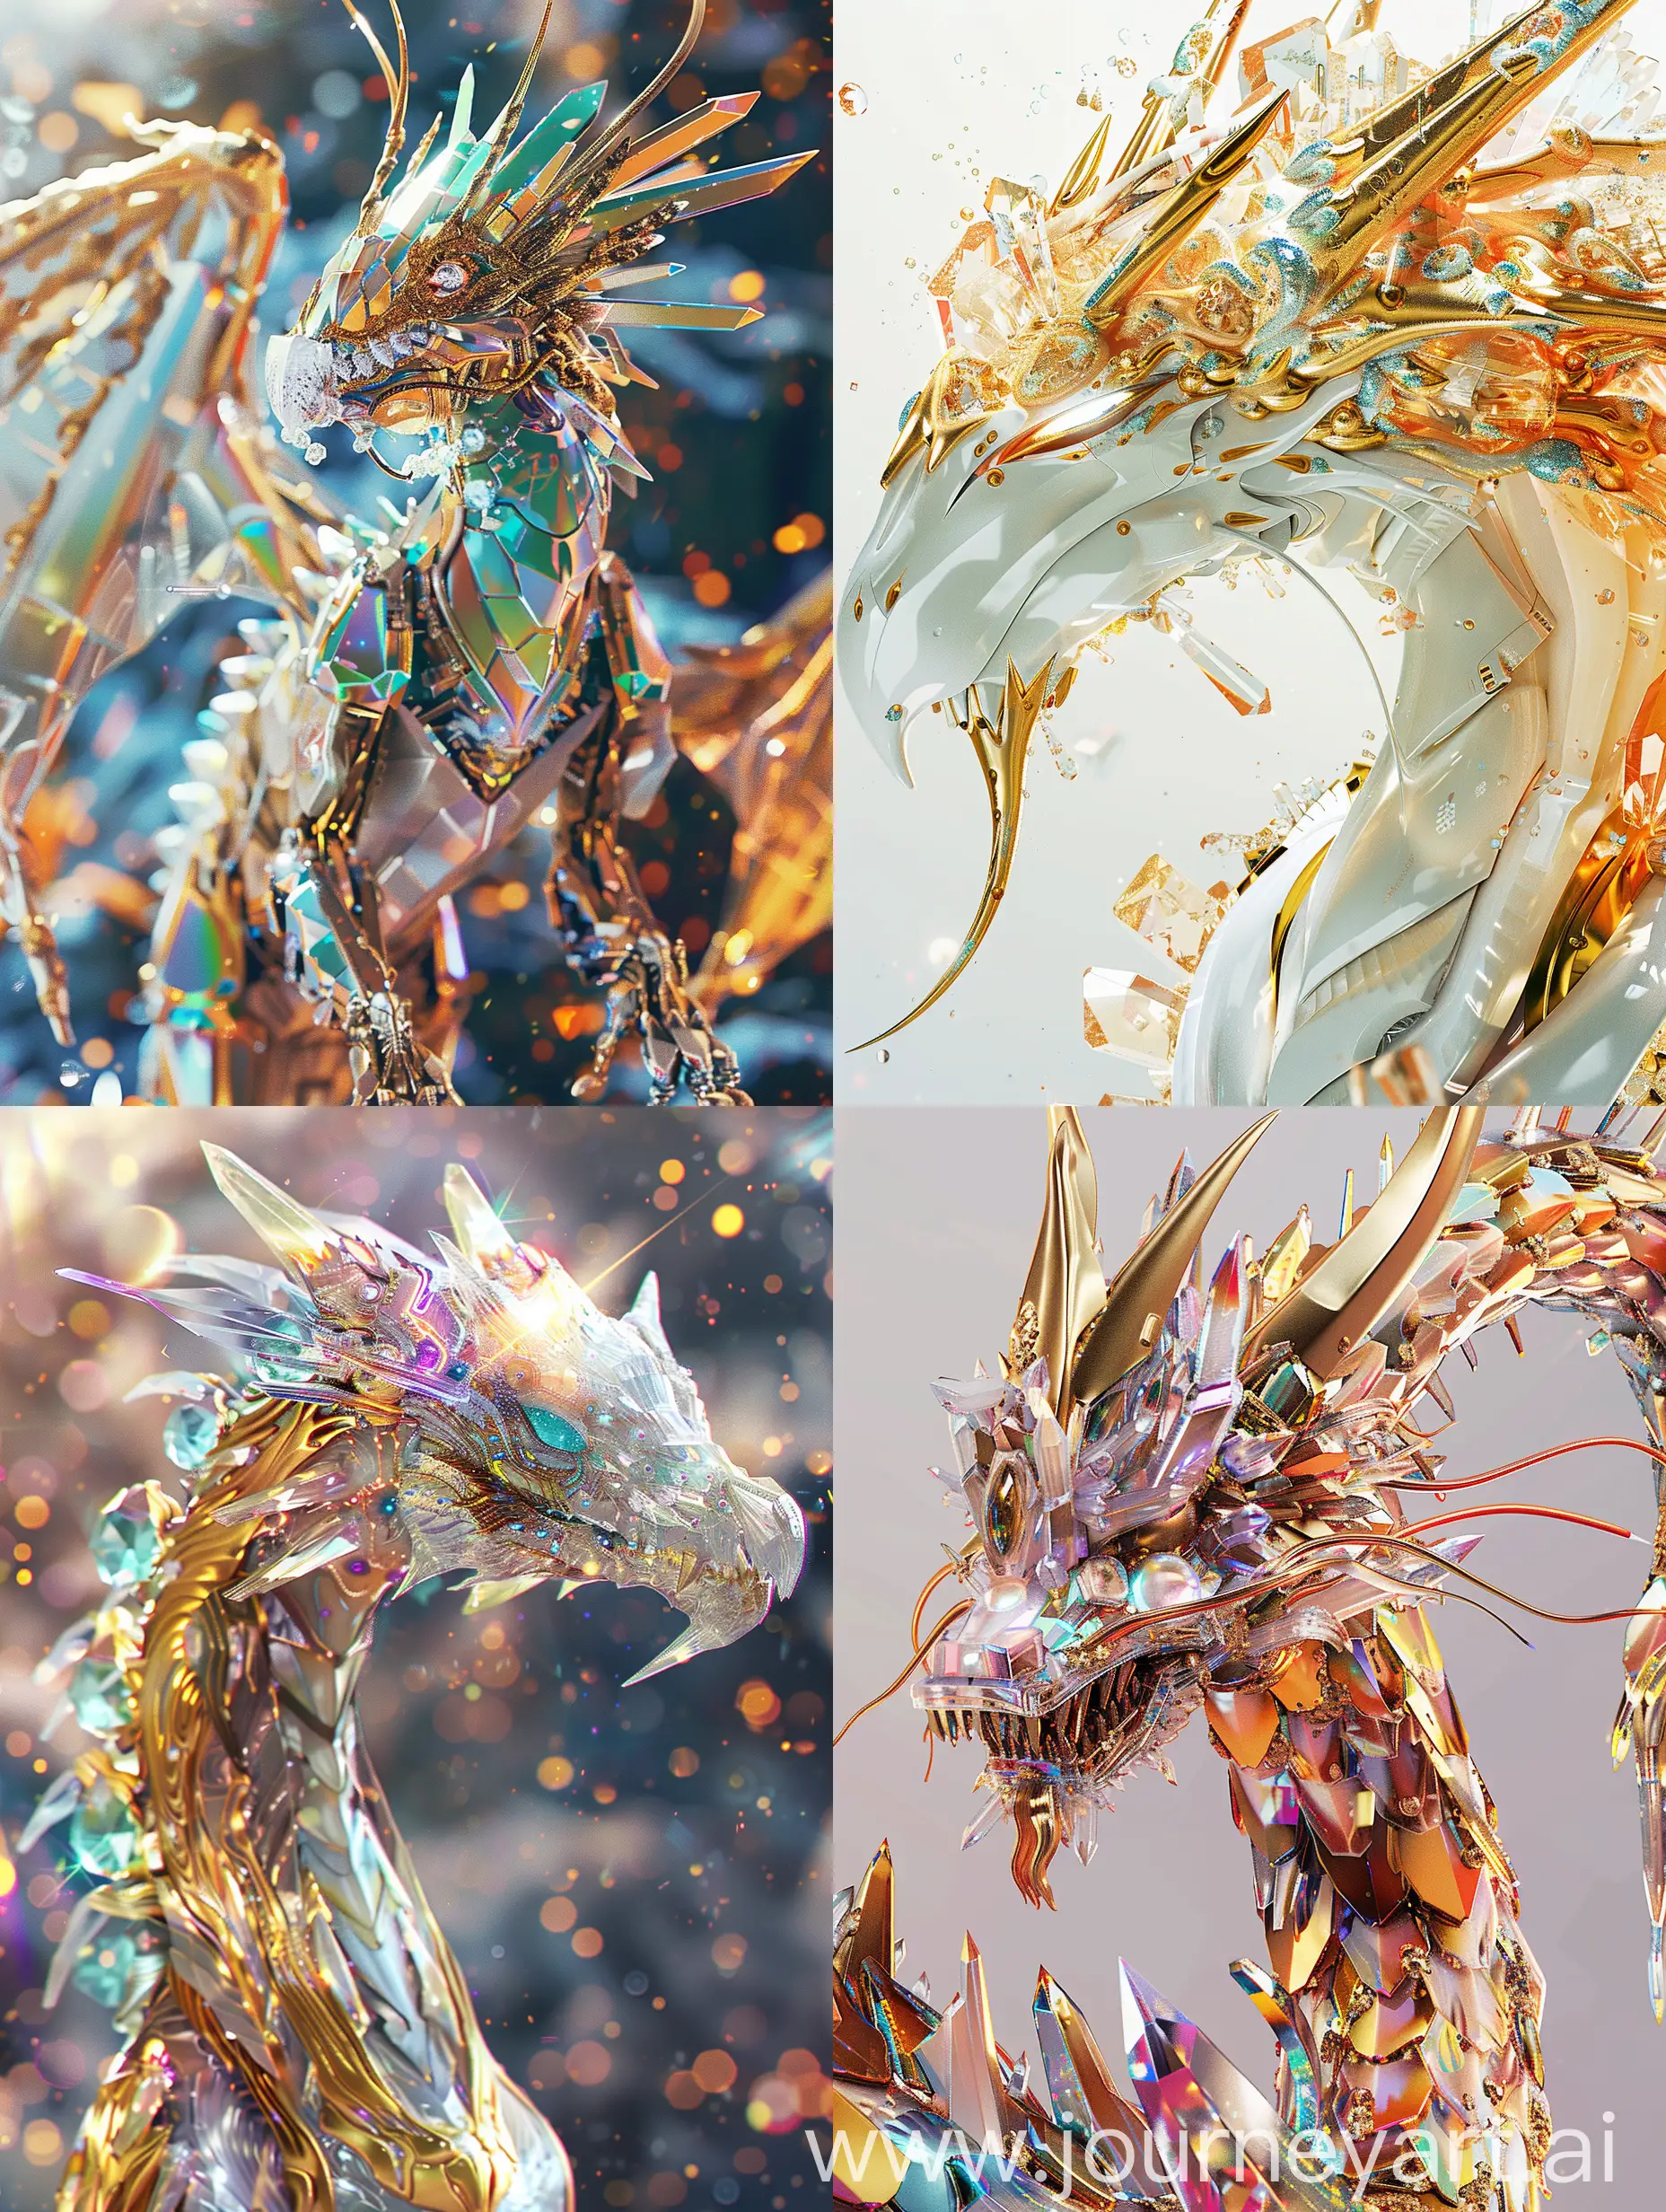 Futuristic-Robot-Dragon-Prince-with-Extraterrestrial-Crystal-Coating